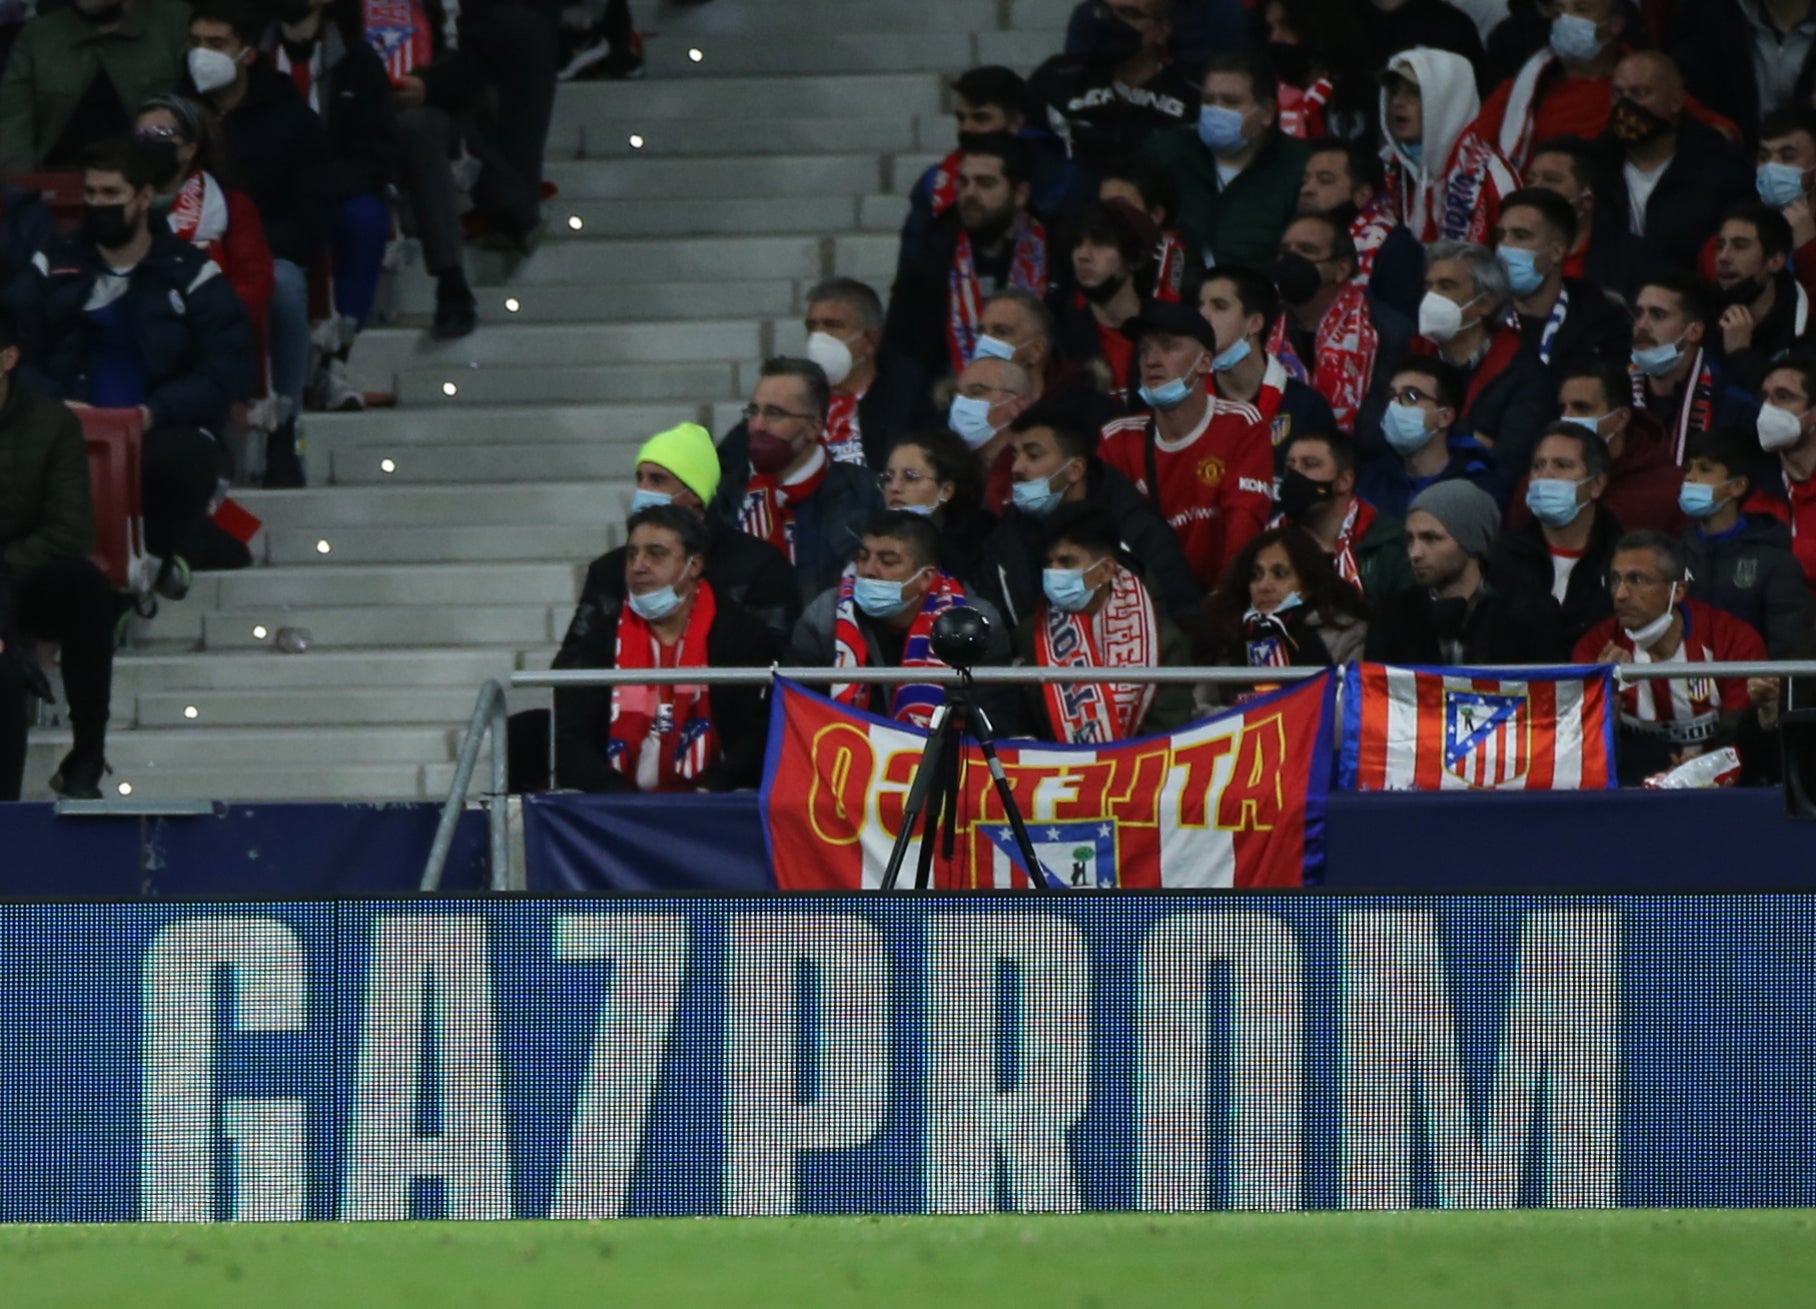 The Gazprom logo has been a regular sight at Champions League matches across Europe over recent years (Isabel Infantes/PA)